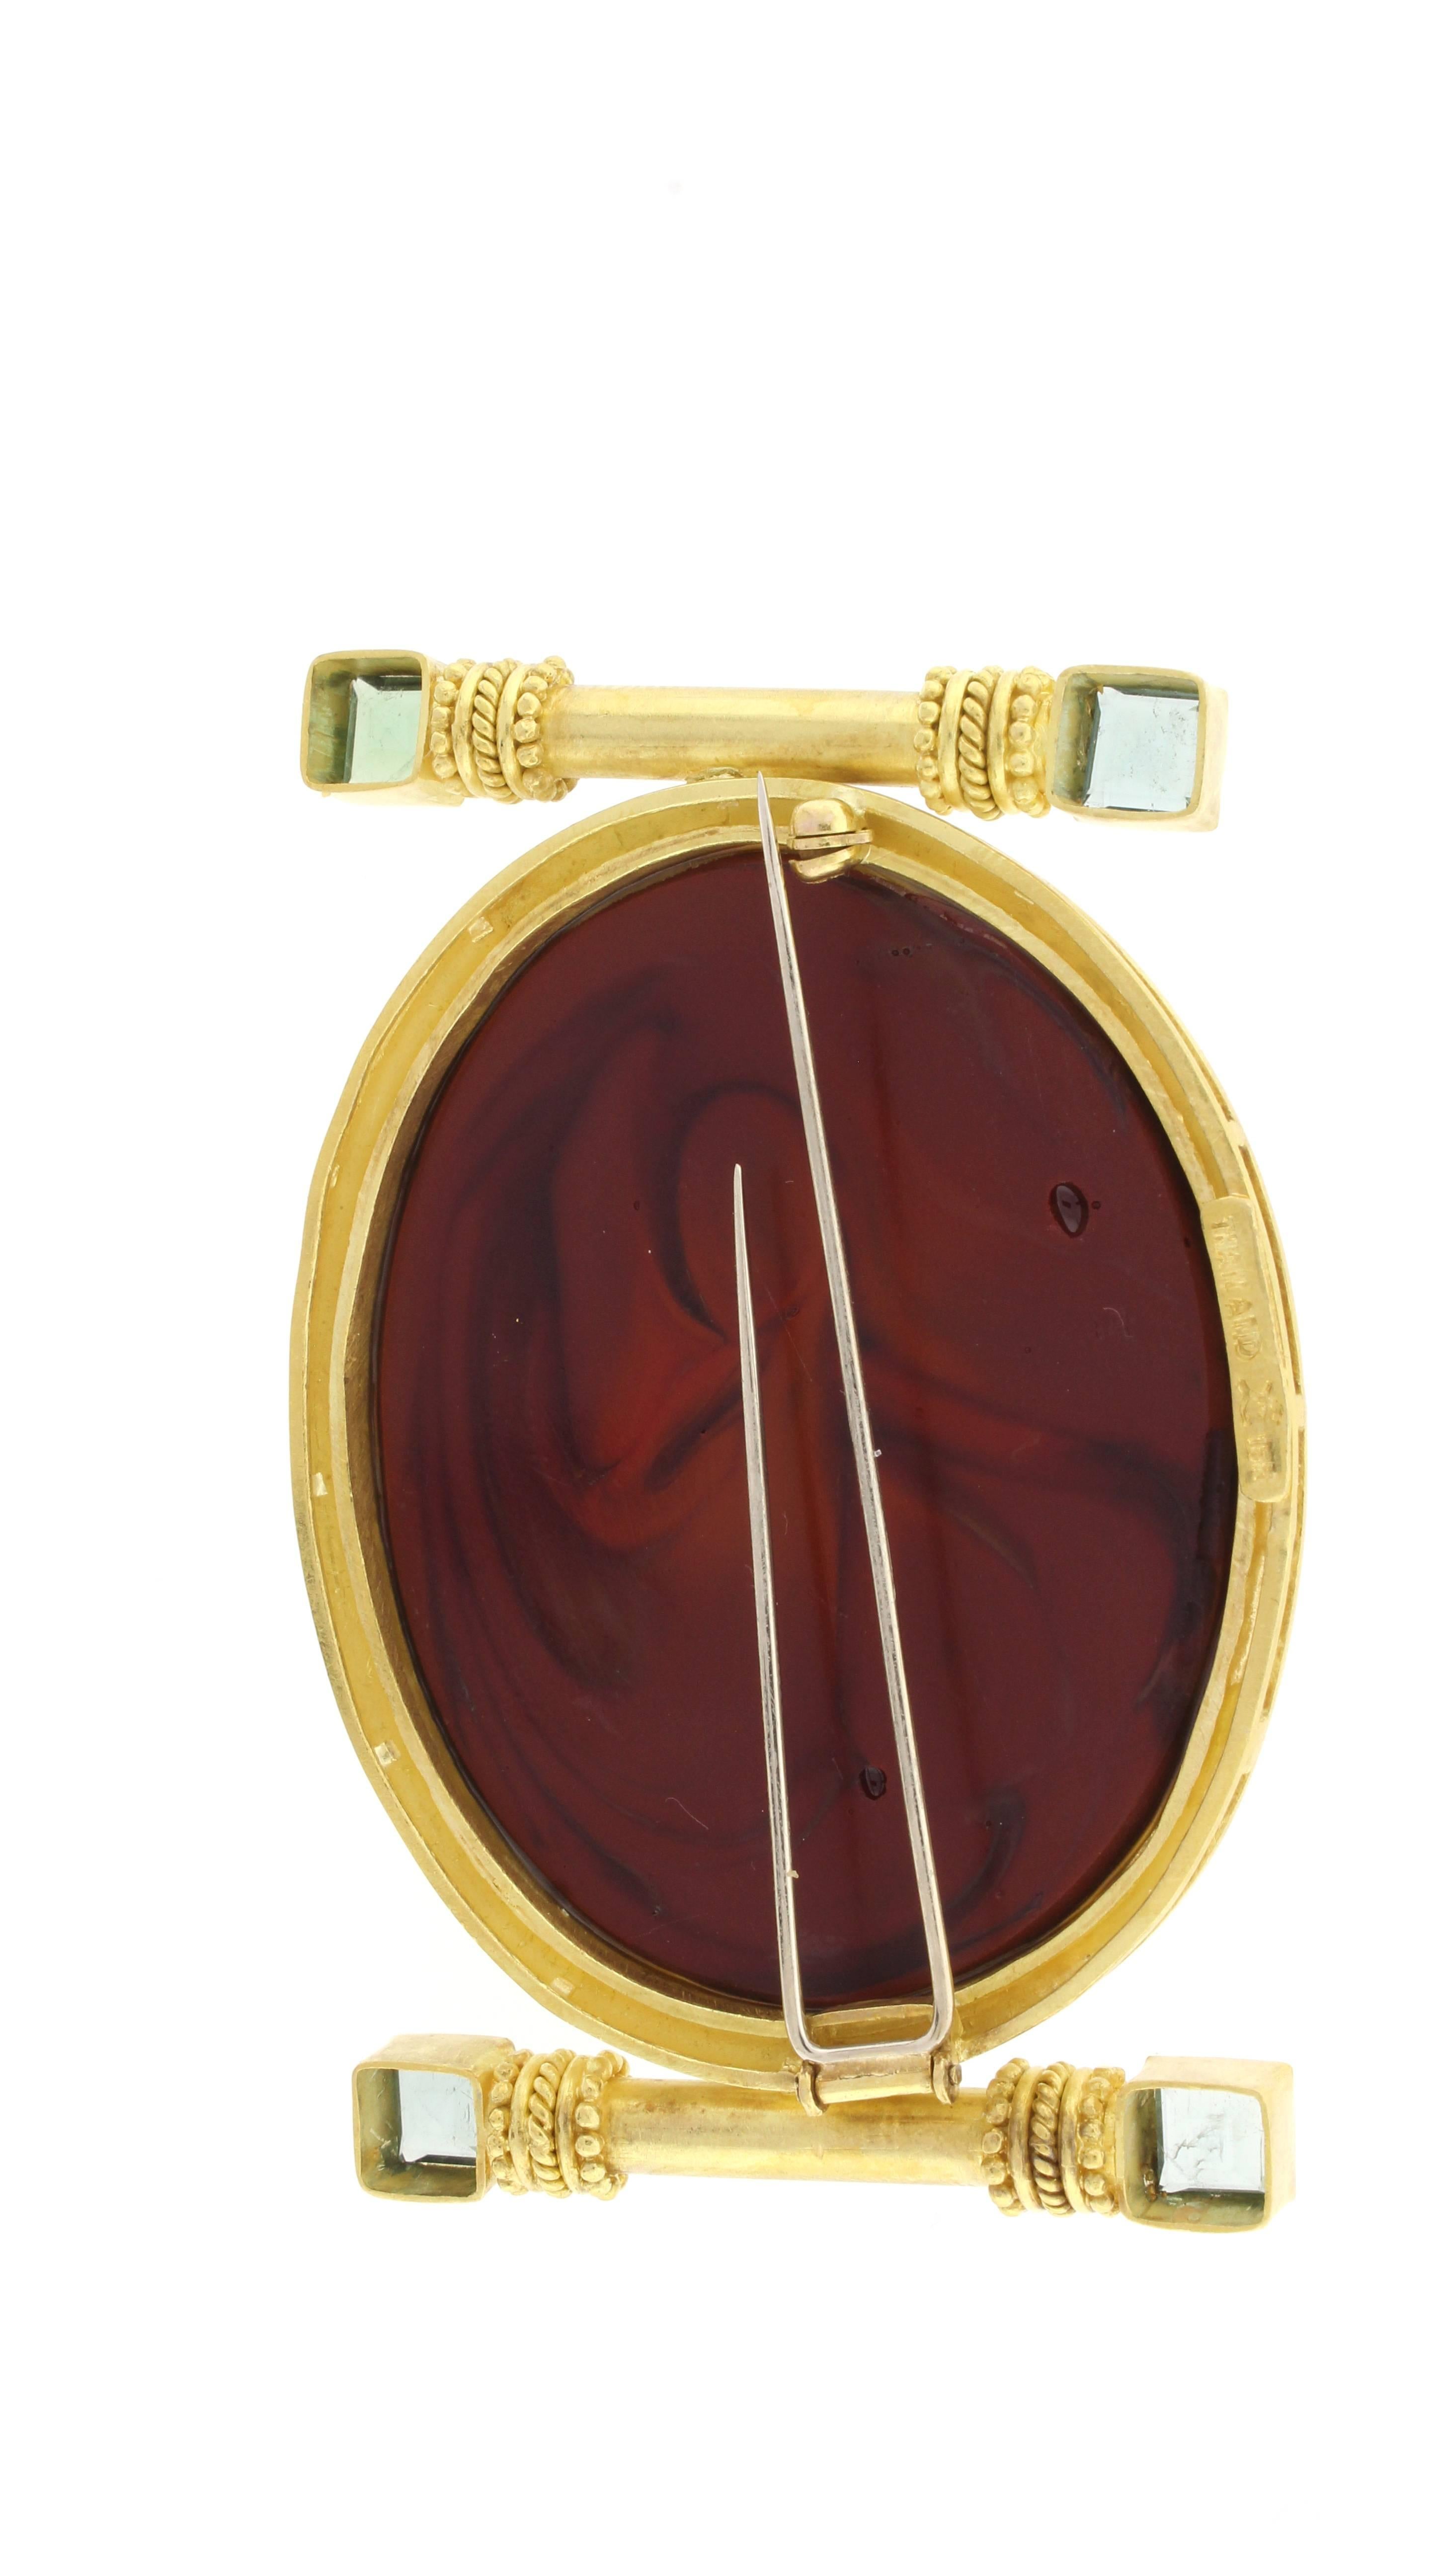 From acclaimed jeweler, Elizabeth Locke this 19 Karat carved burgundy glass  cameo brooch depicting  the head of medusa of Greek mythology. The oval cameo measures 1 ½ by 2 ¼ inches.  The cameo is set in a heavy gold border supported by to gold